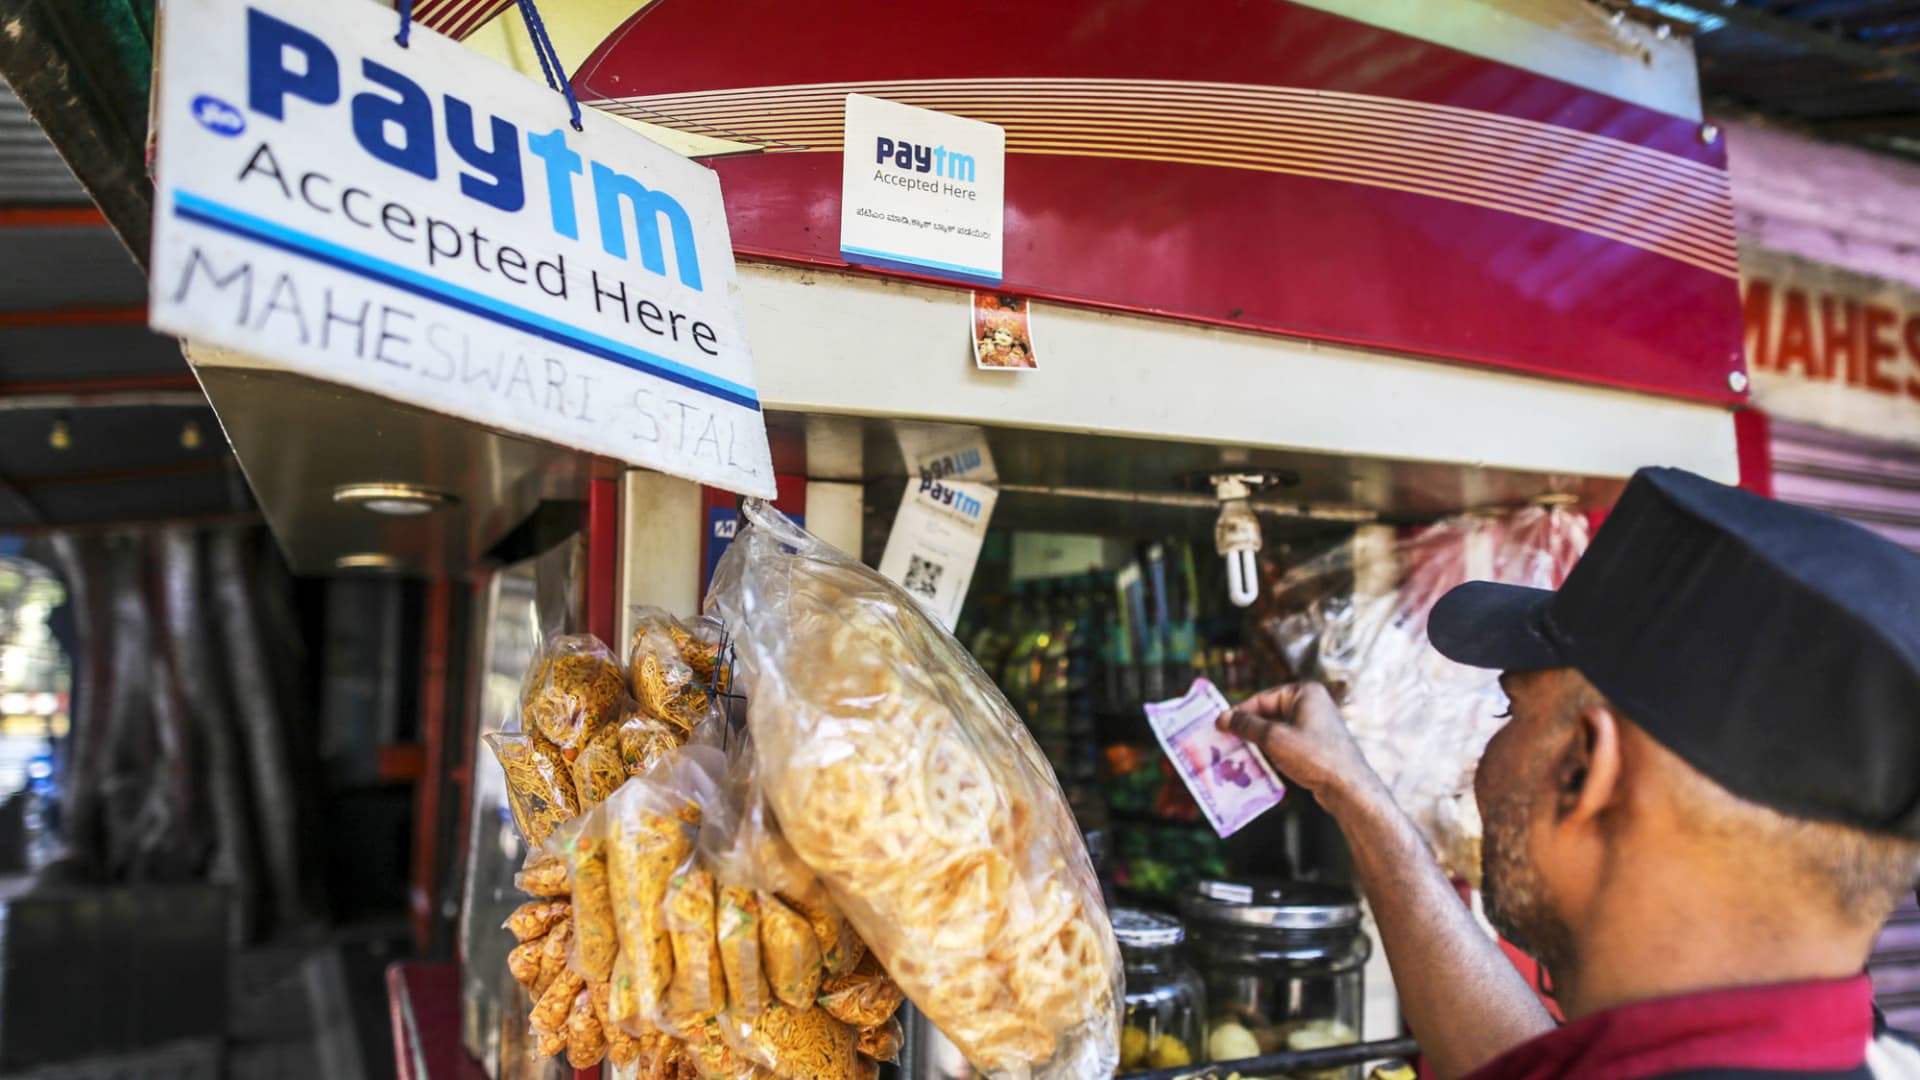 A customer uses an Indian Rupee banknote to pay for a purchase as a sign for PayTM online payment method is displayed at a stall selling snacks in Bengaluru, India.